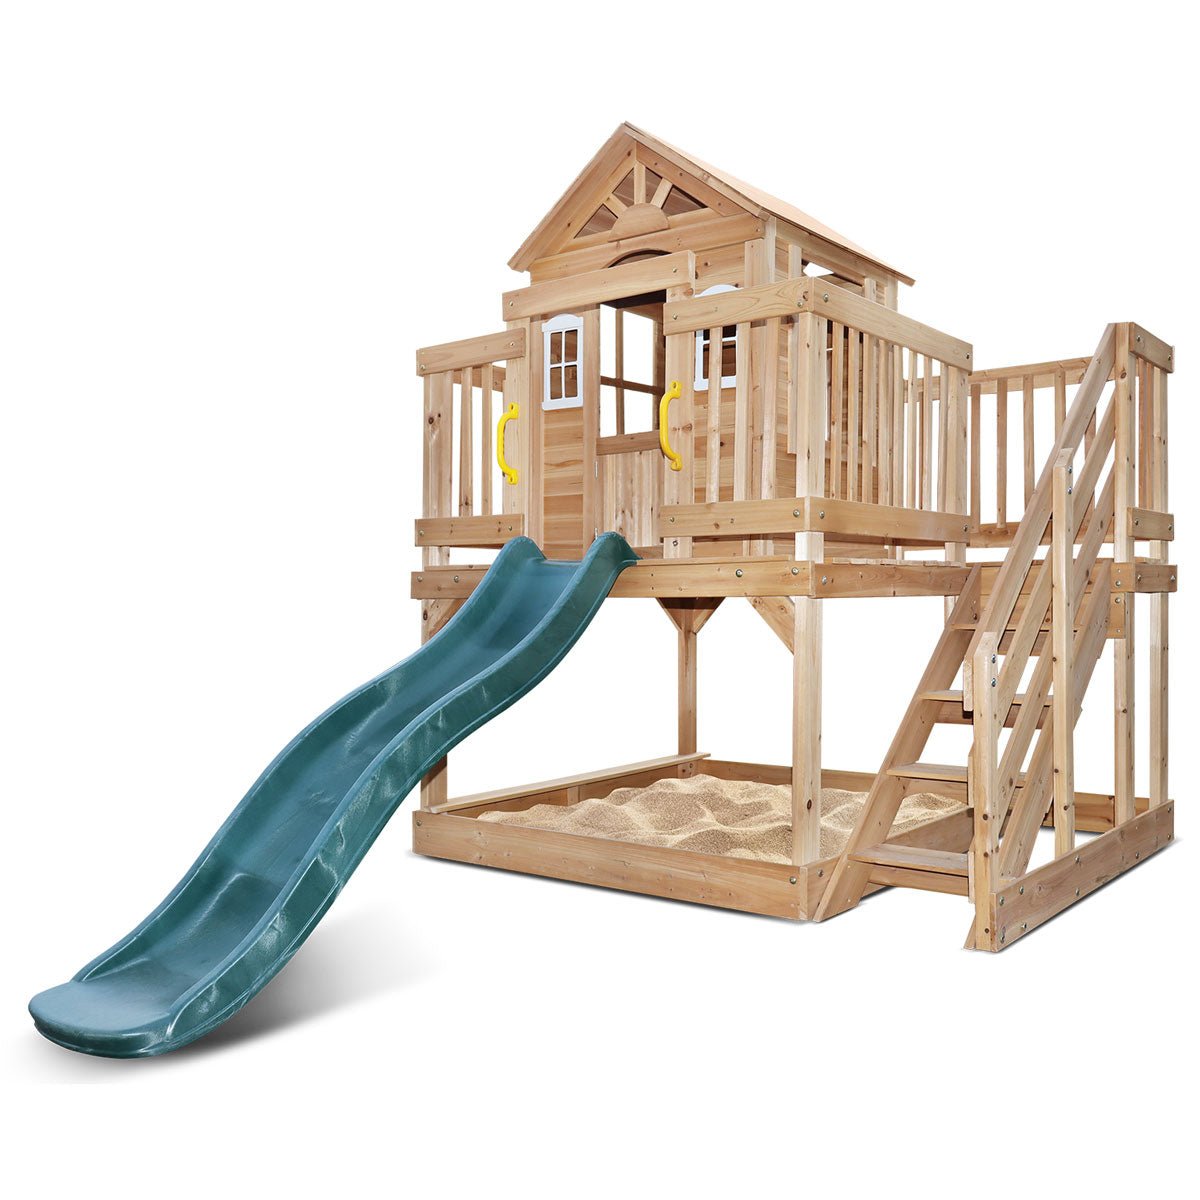 Shop Silverton Cubby House - Slide Into Playtime Excitement